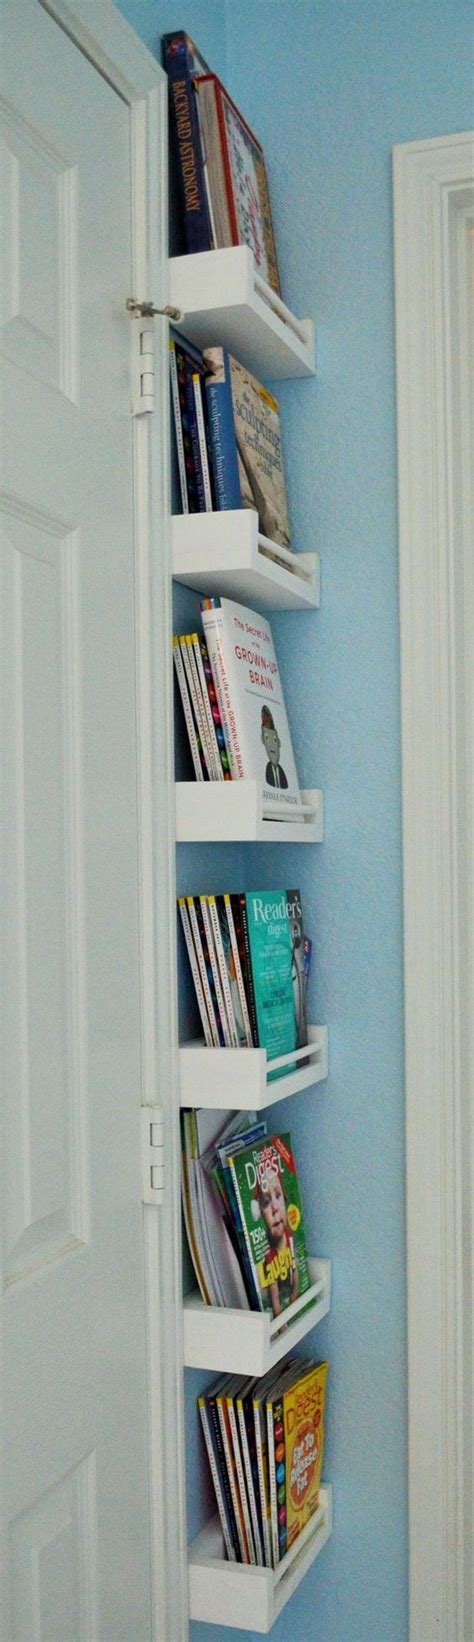 40 ways to organize with an ikea spice rack a girl and a glue gun girl room girls bedroom